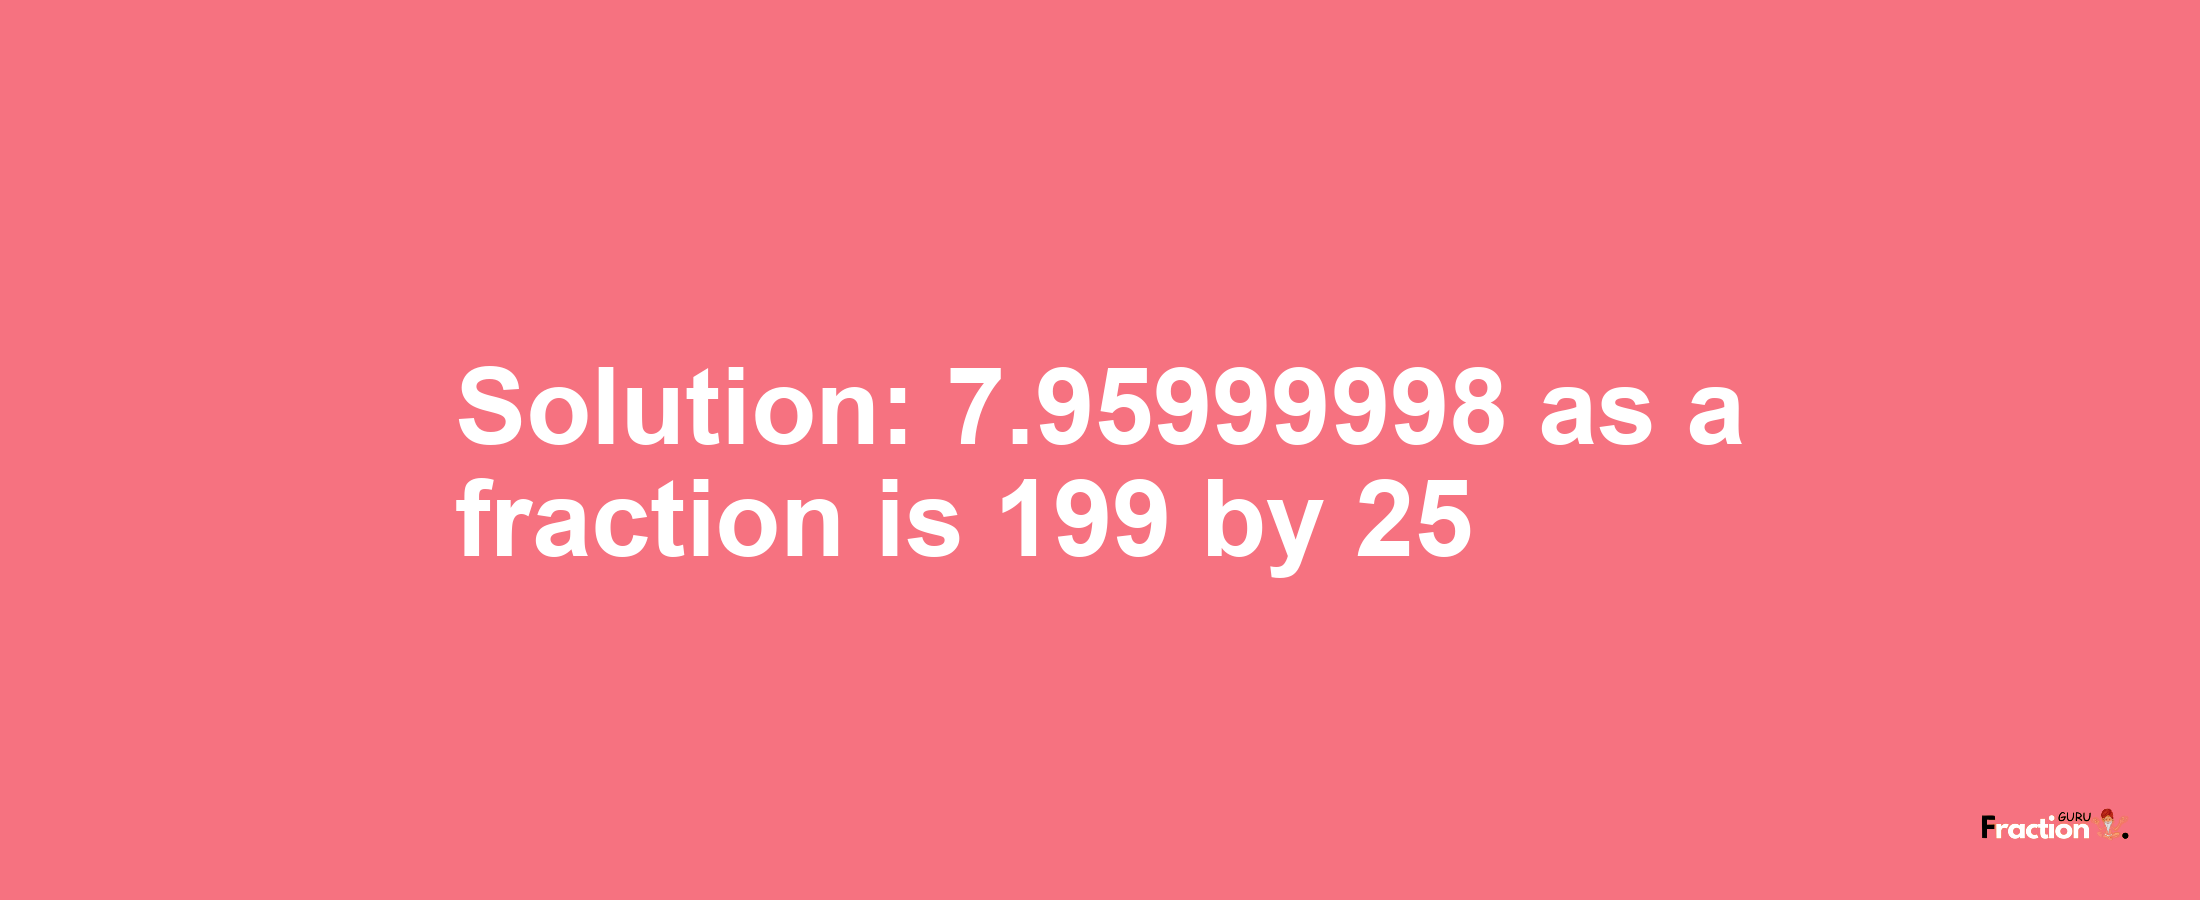 Solution:7.95999998 as a fraction is 199/25